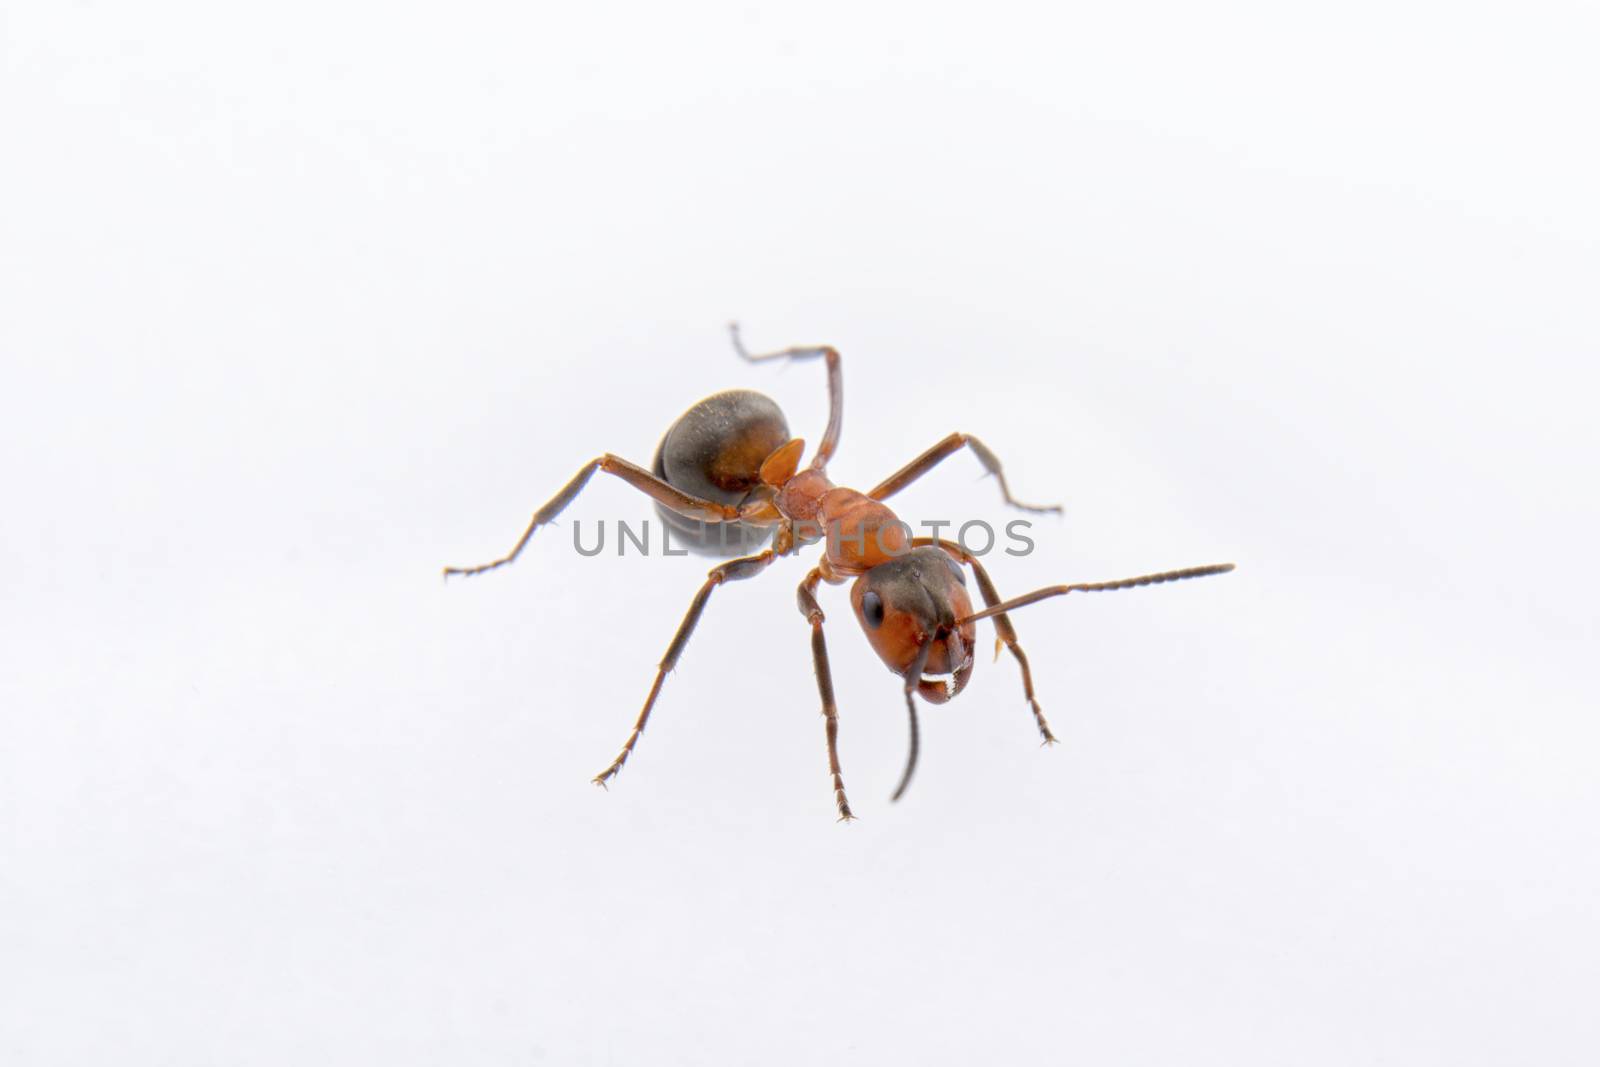 Brown ant on a white background by neryx